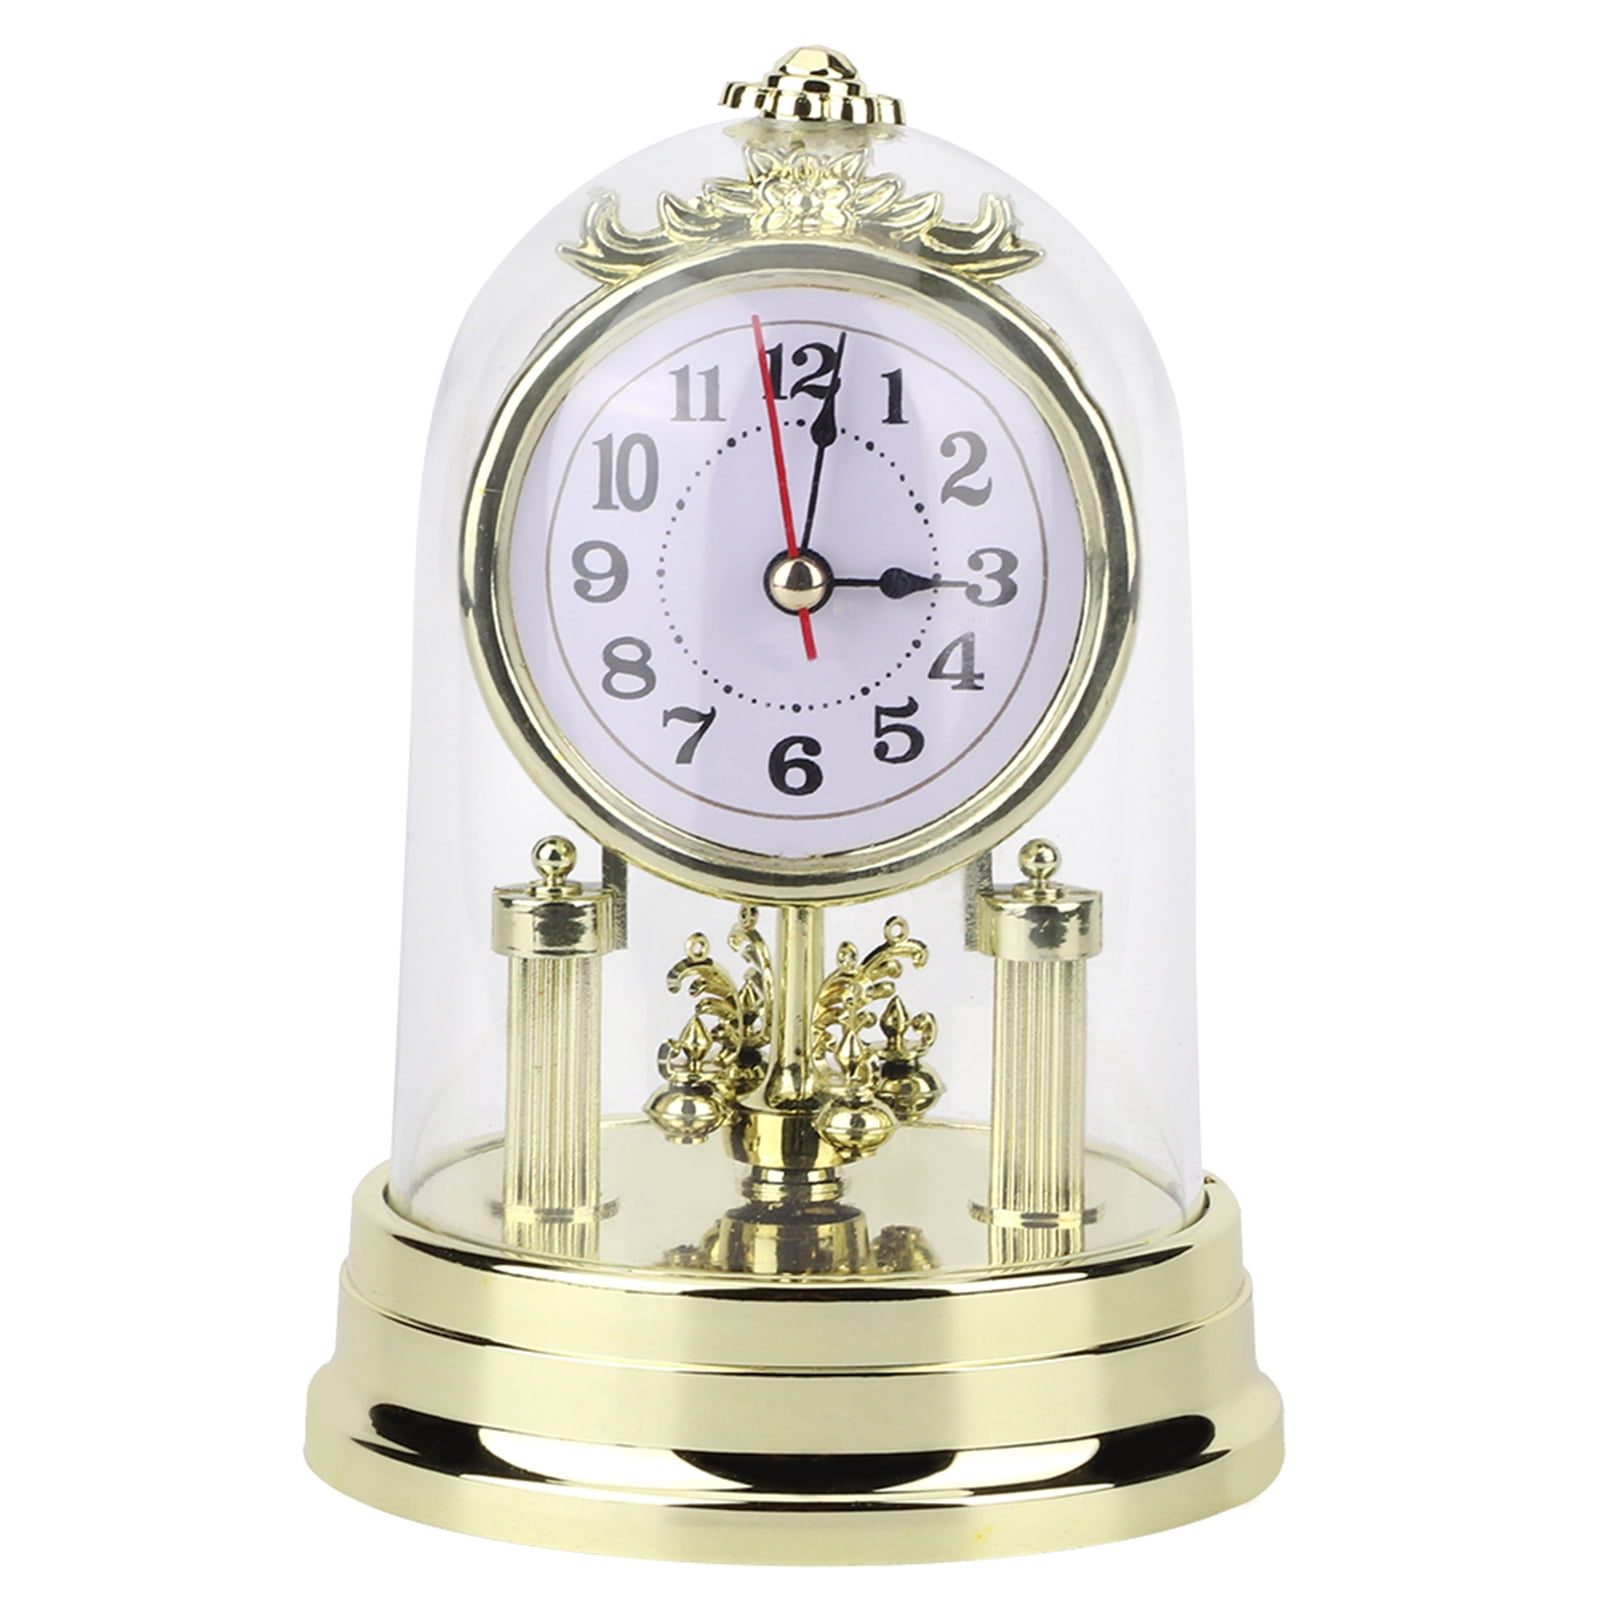 Antique Clock,Desk Clock Vintage Retro Plastic Table Clock with Pendulum for Living Room Home Decorative,Gift,Battery Operated,White 